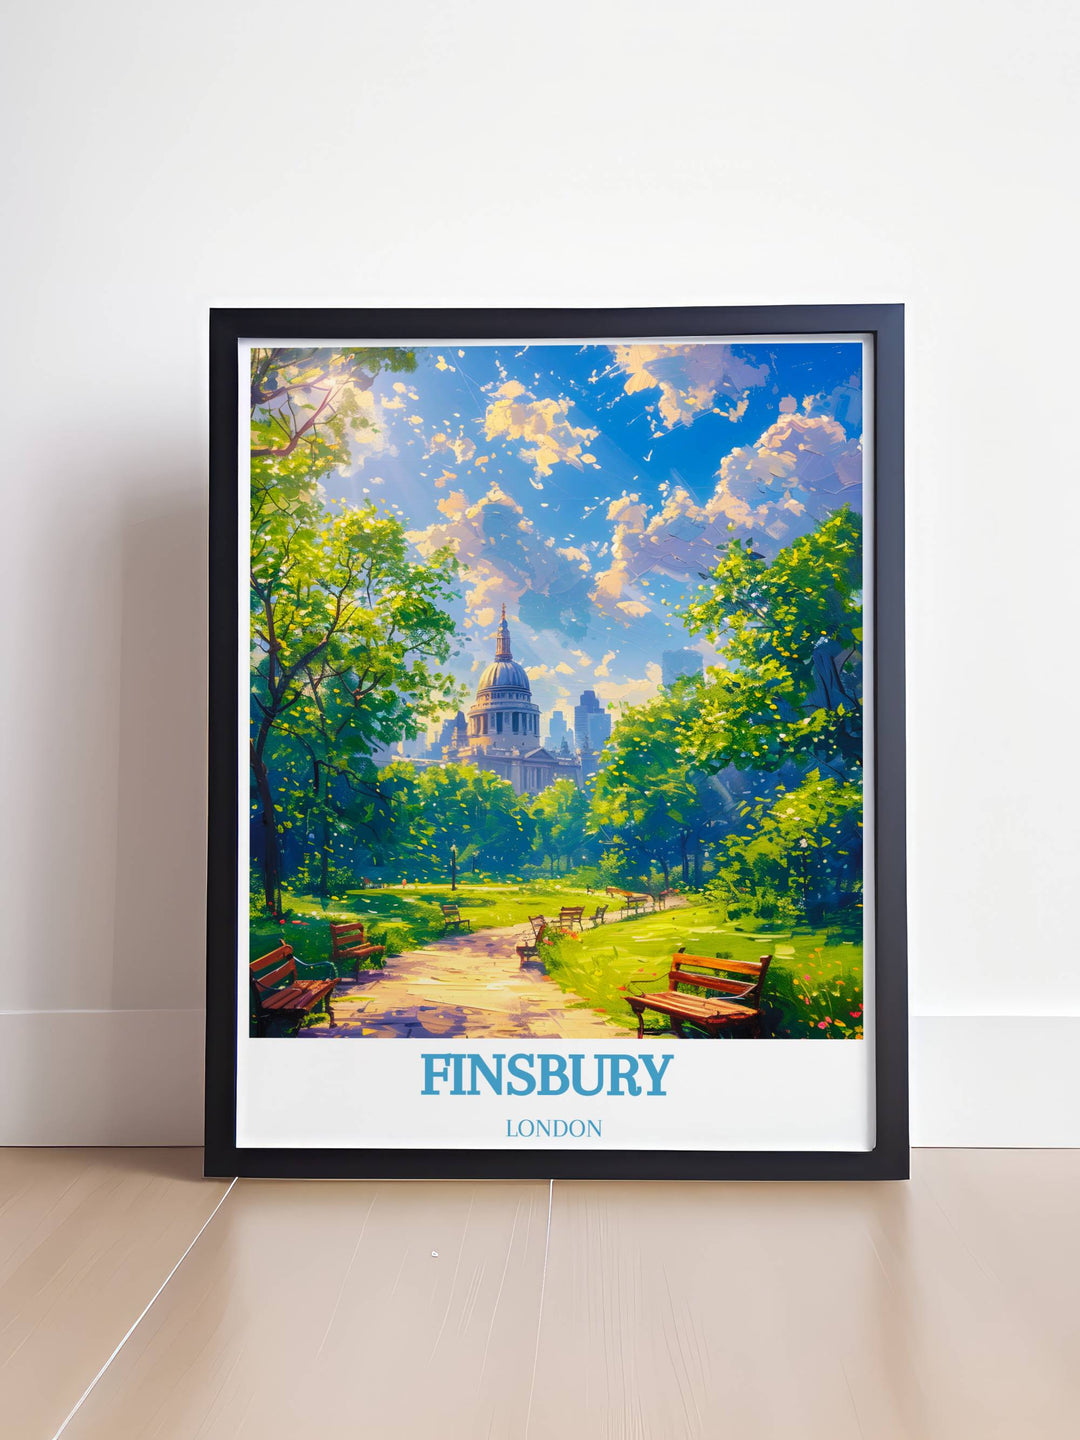 Add some flare to your area with a thorough Finsbury Park print. This London picture is a distinctive and creative addition to your decor, showcasing the parks arrangement and important monuments. Ideal for people who value tasteful and intricate art.